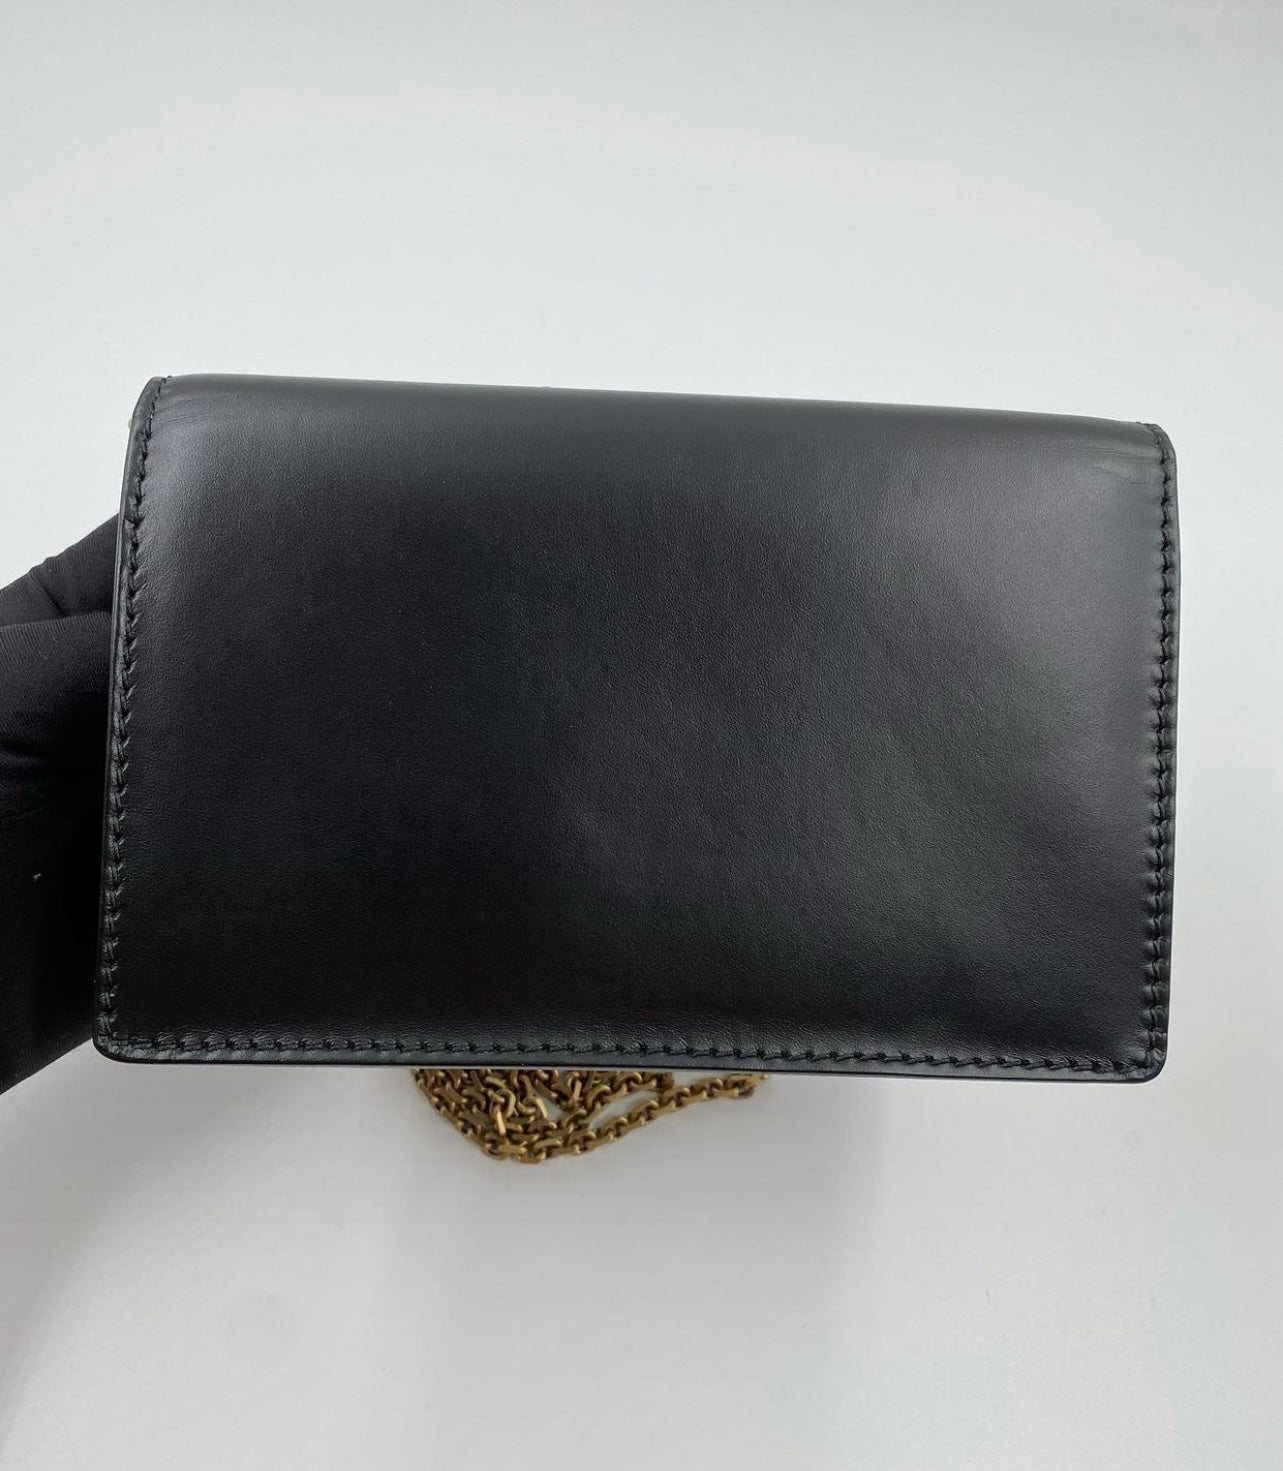 Authentic Christian Dior WOC